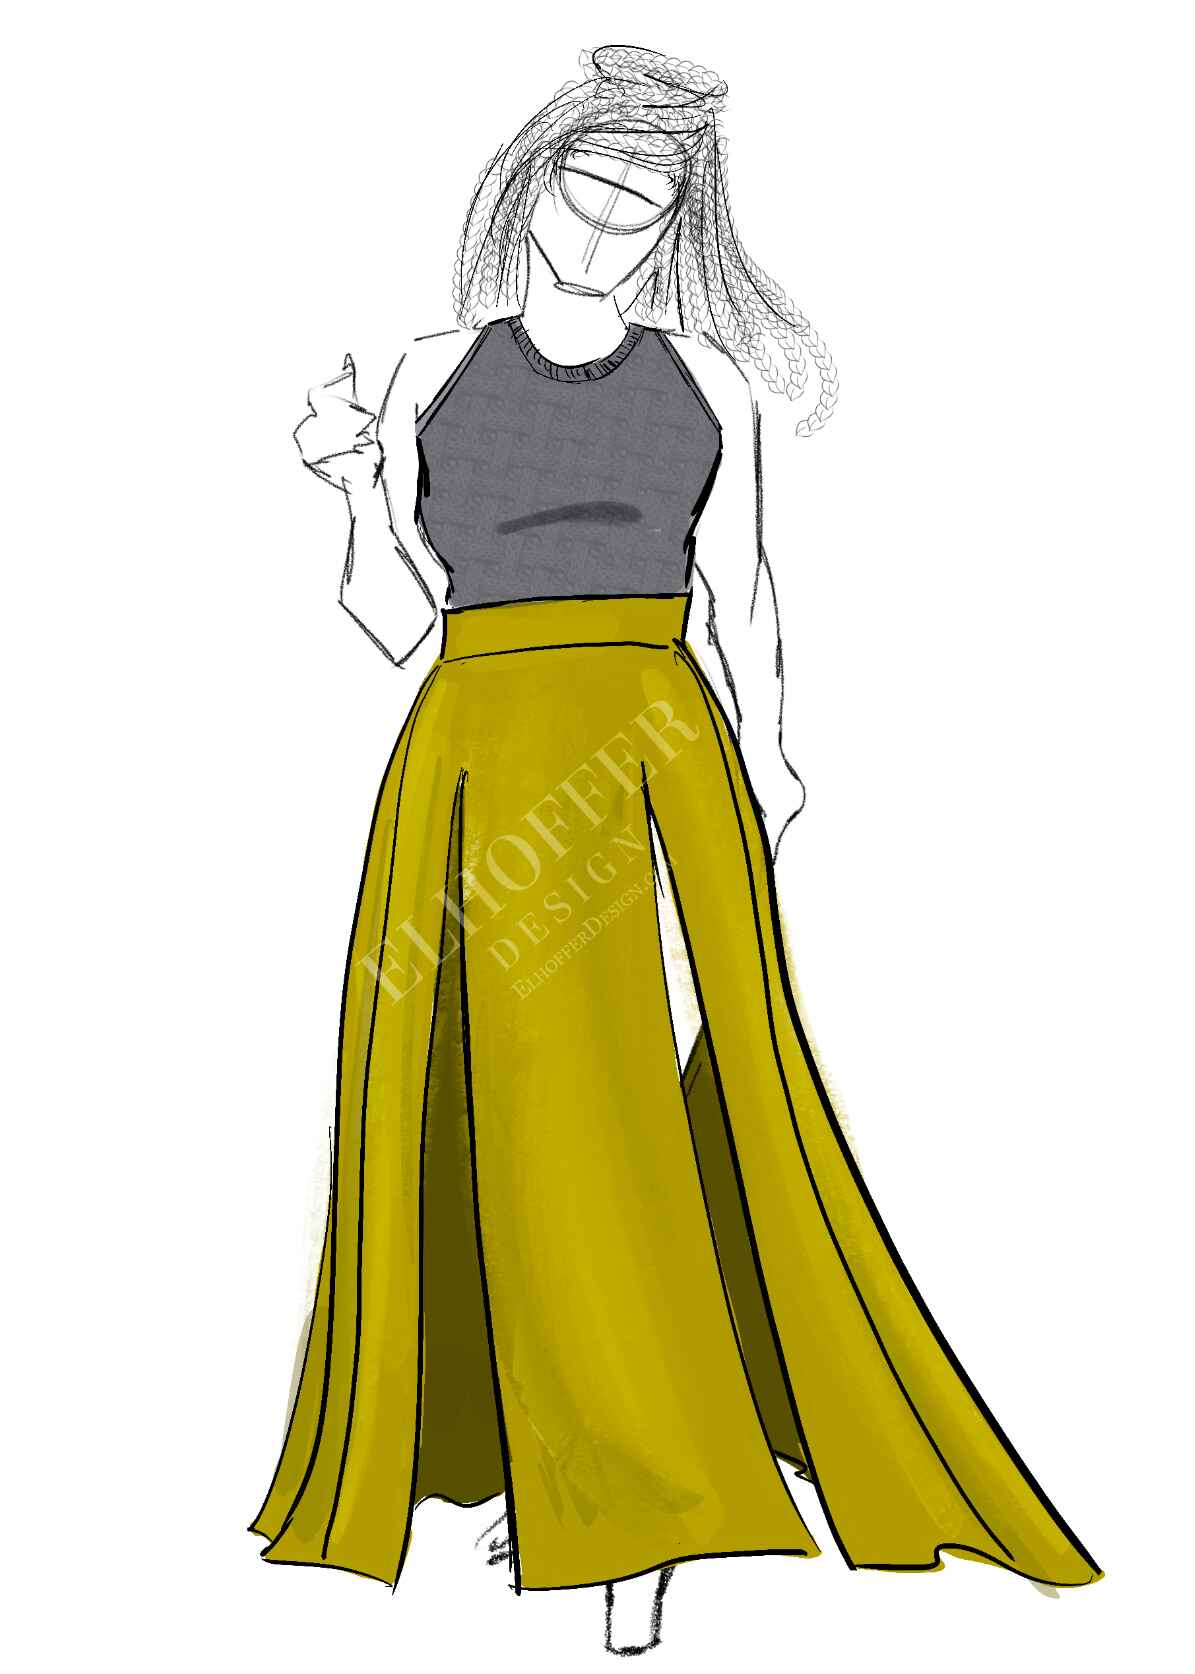 Add-On: Skirt Alterations